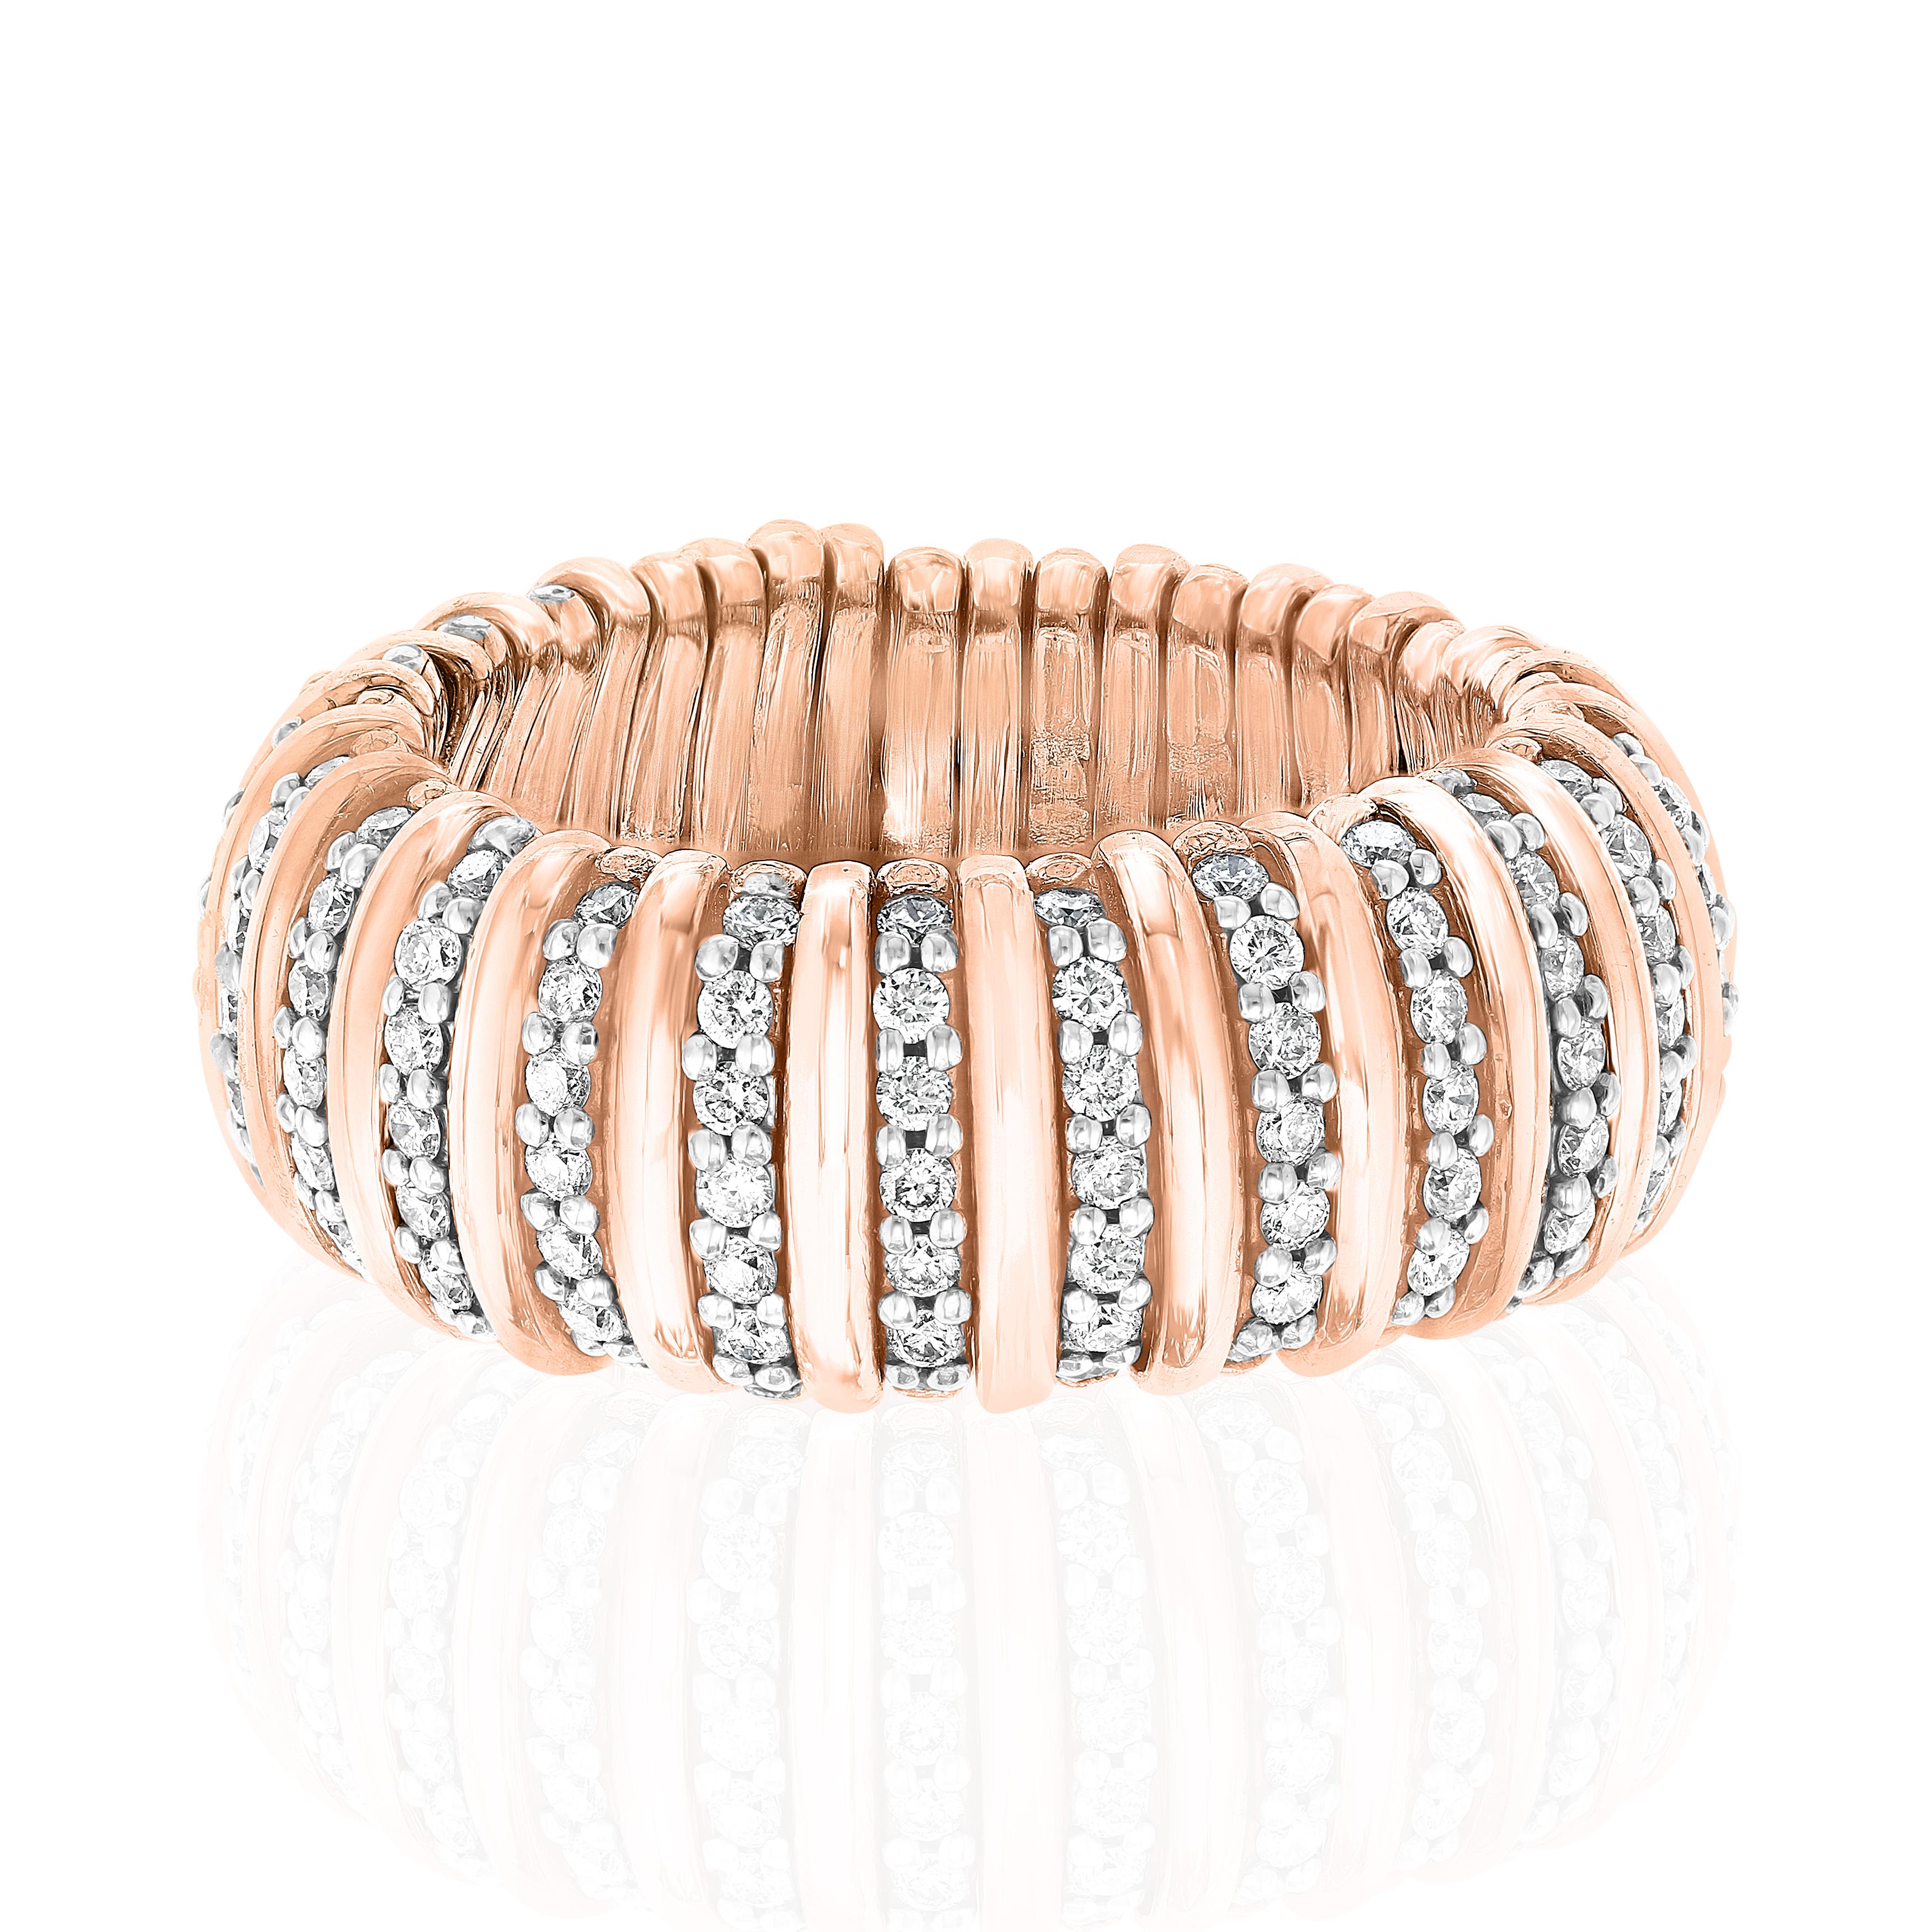 Two Tone Rose and White Gold set with Round Diamonds weighing 1.399 Carats.
Diamond pattern going all the way around.
Ring is stretchable and can be worn between a size 8-10.
18 Karat Gold.